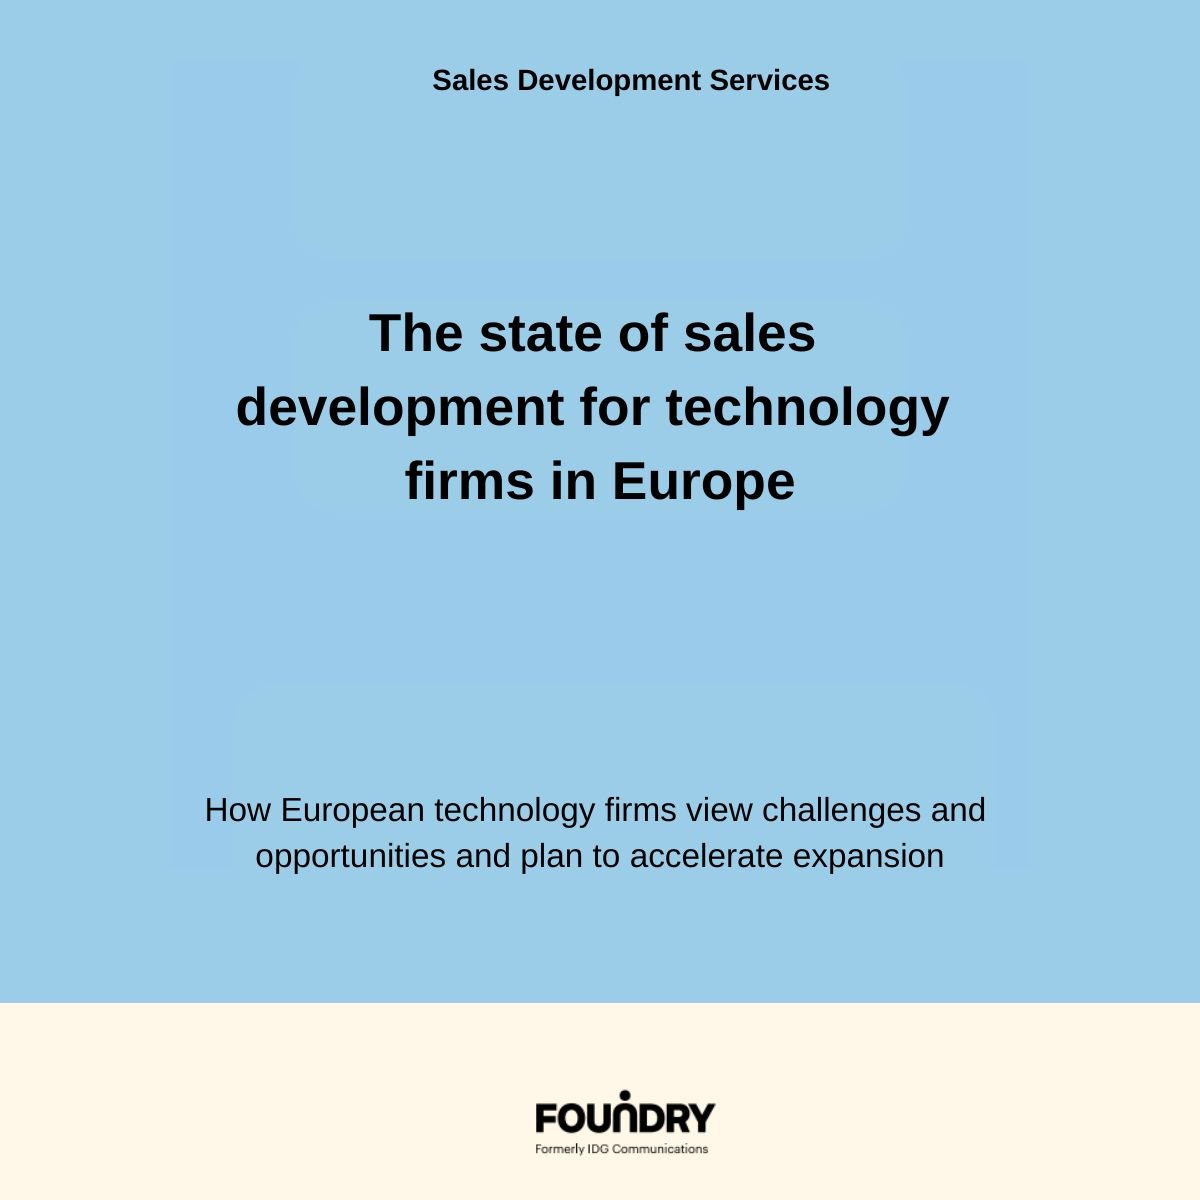 The state of sales development for technology firms in Europe